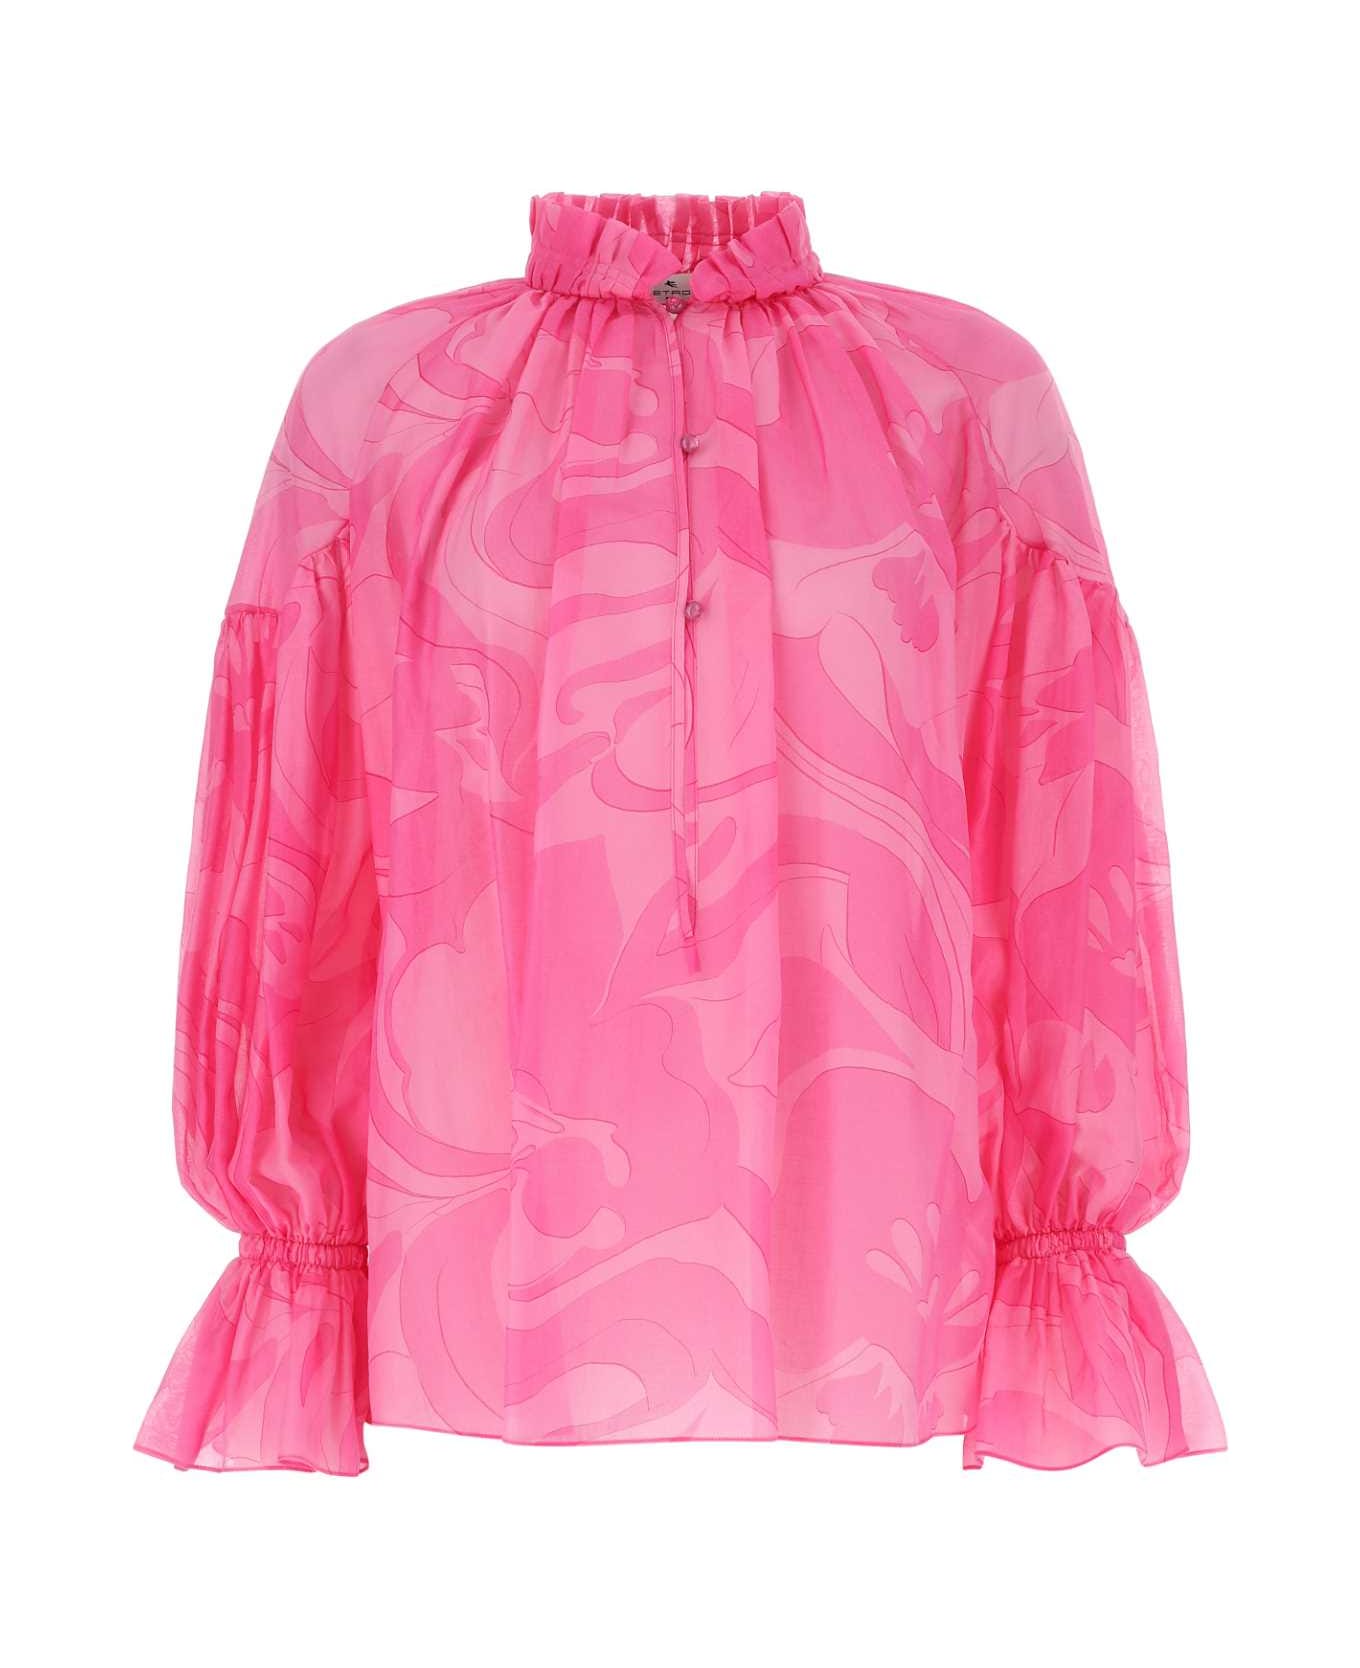 Etro Printed Voile Blouse - PINK